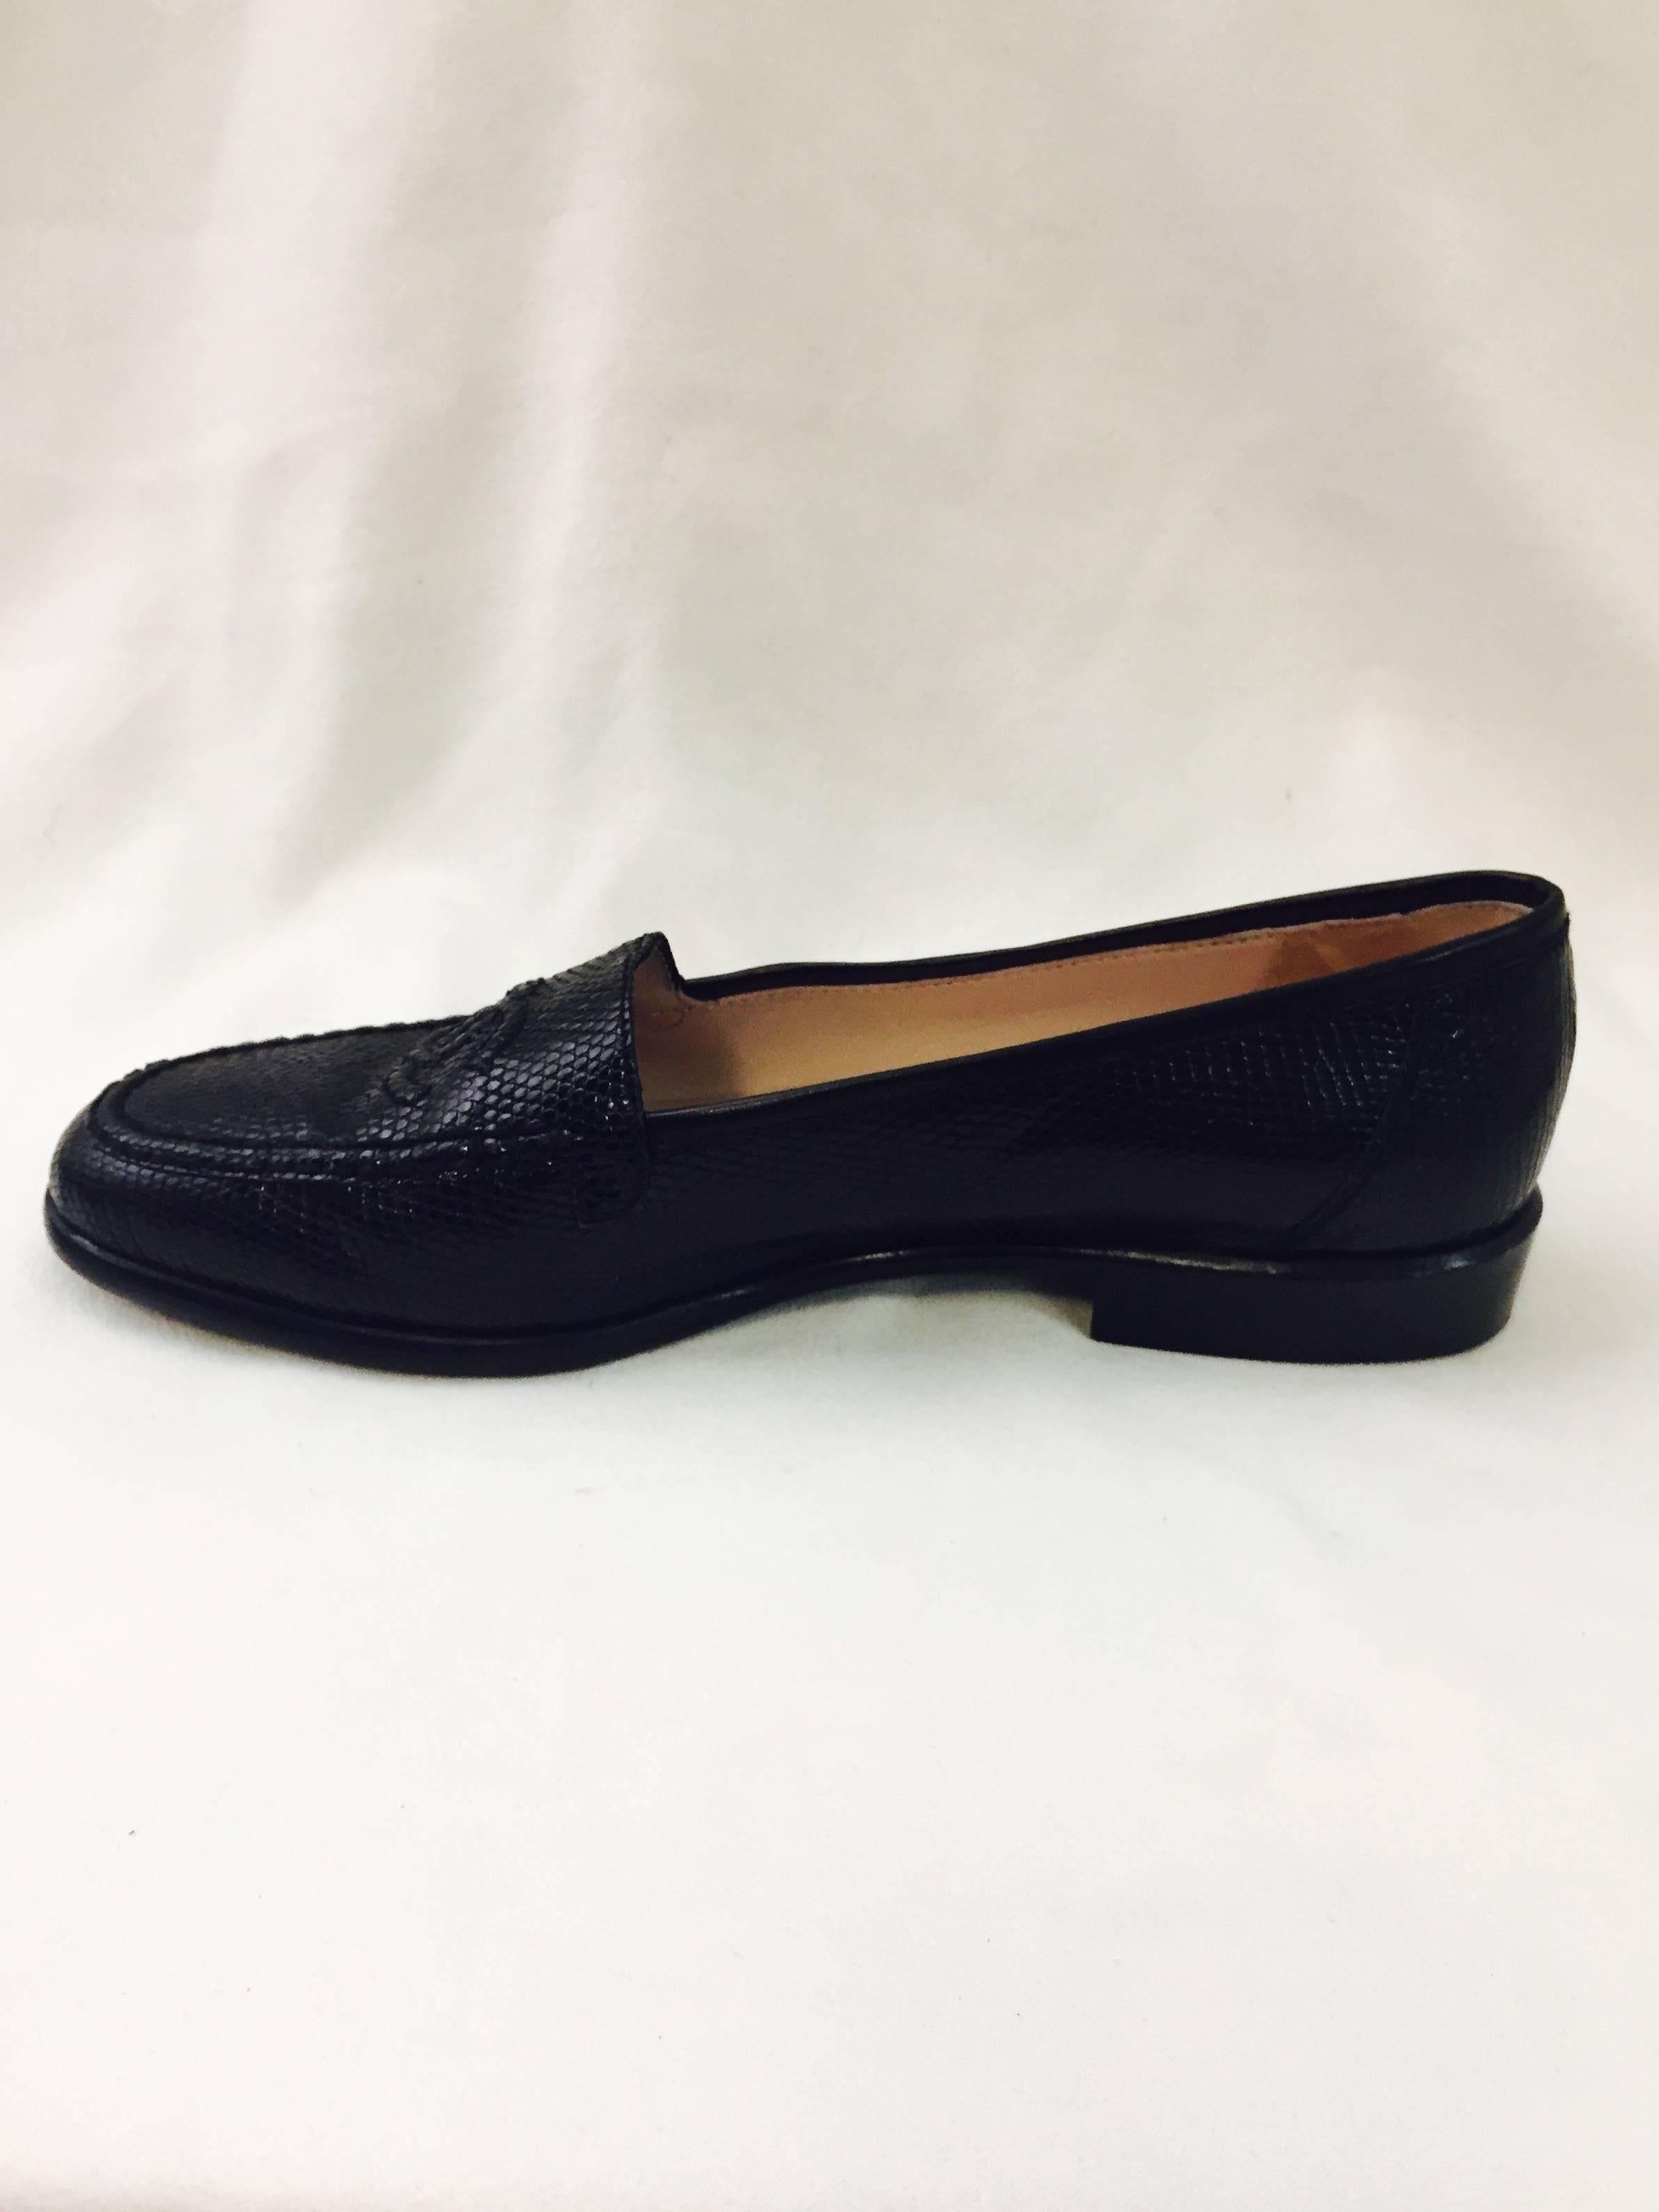 Crafted from luxurious black lizard, these Chanel loafers are anything but basic!  Features tan leather insoles and lining.  Finished with world-renown double 